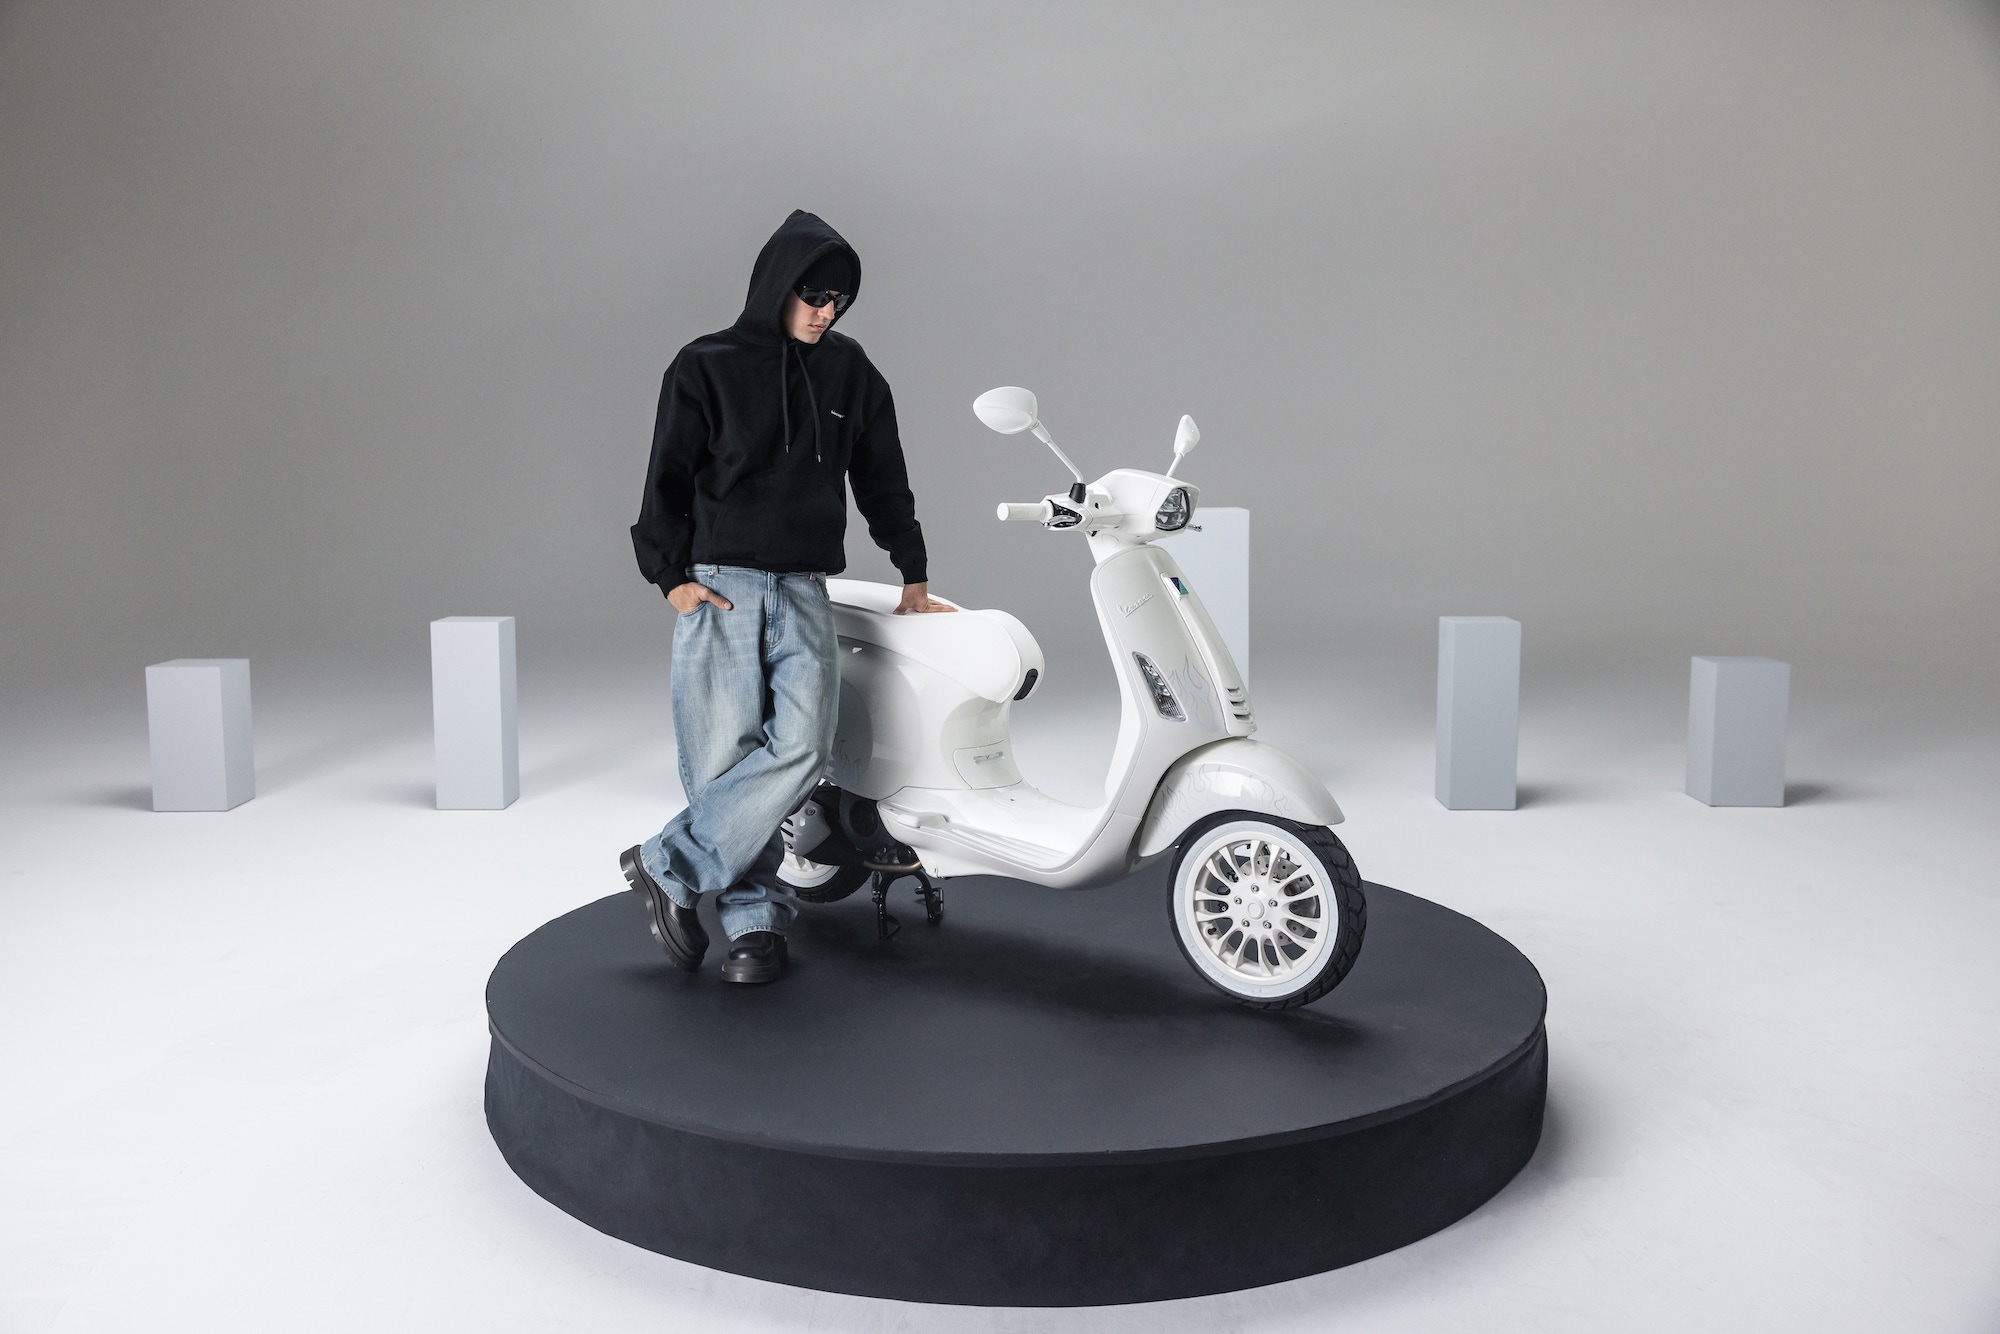 Vespa collaborates with Christian Dior on a 946 scooter